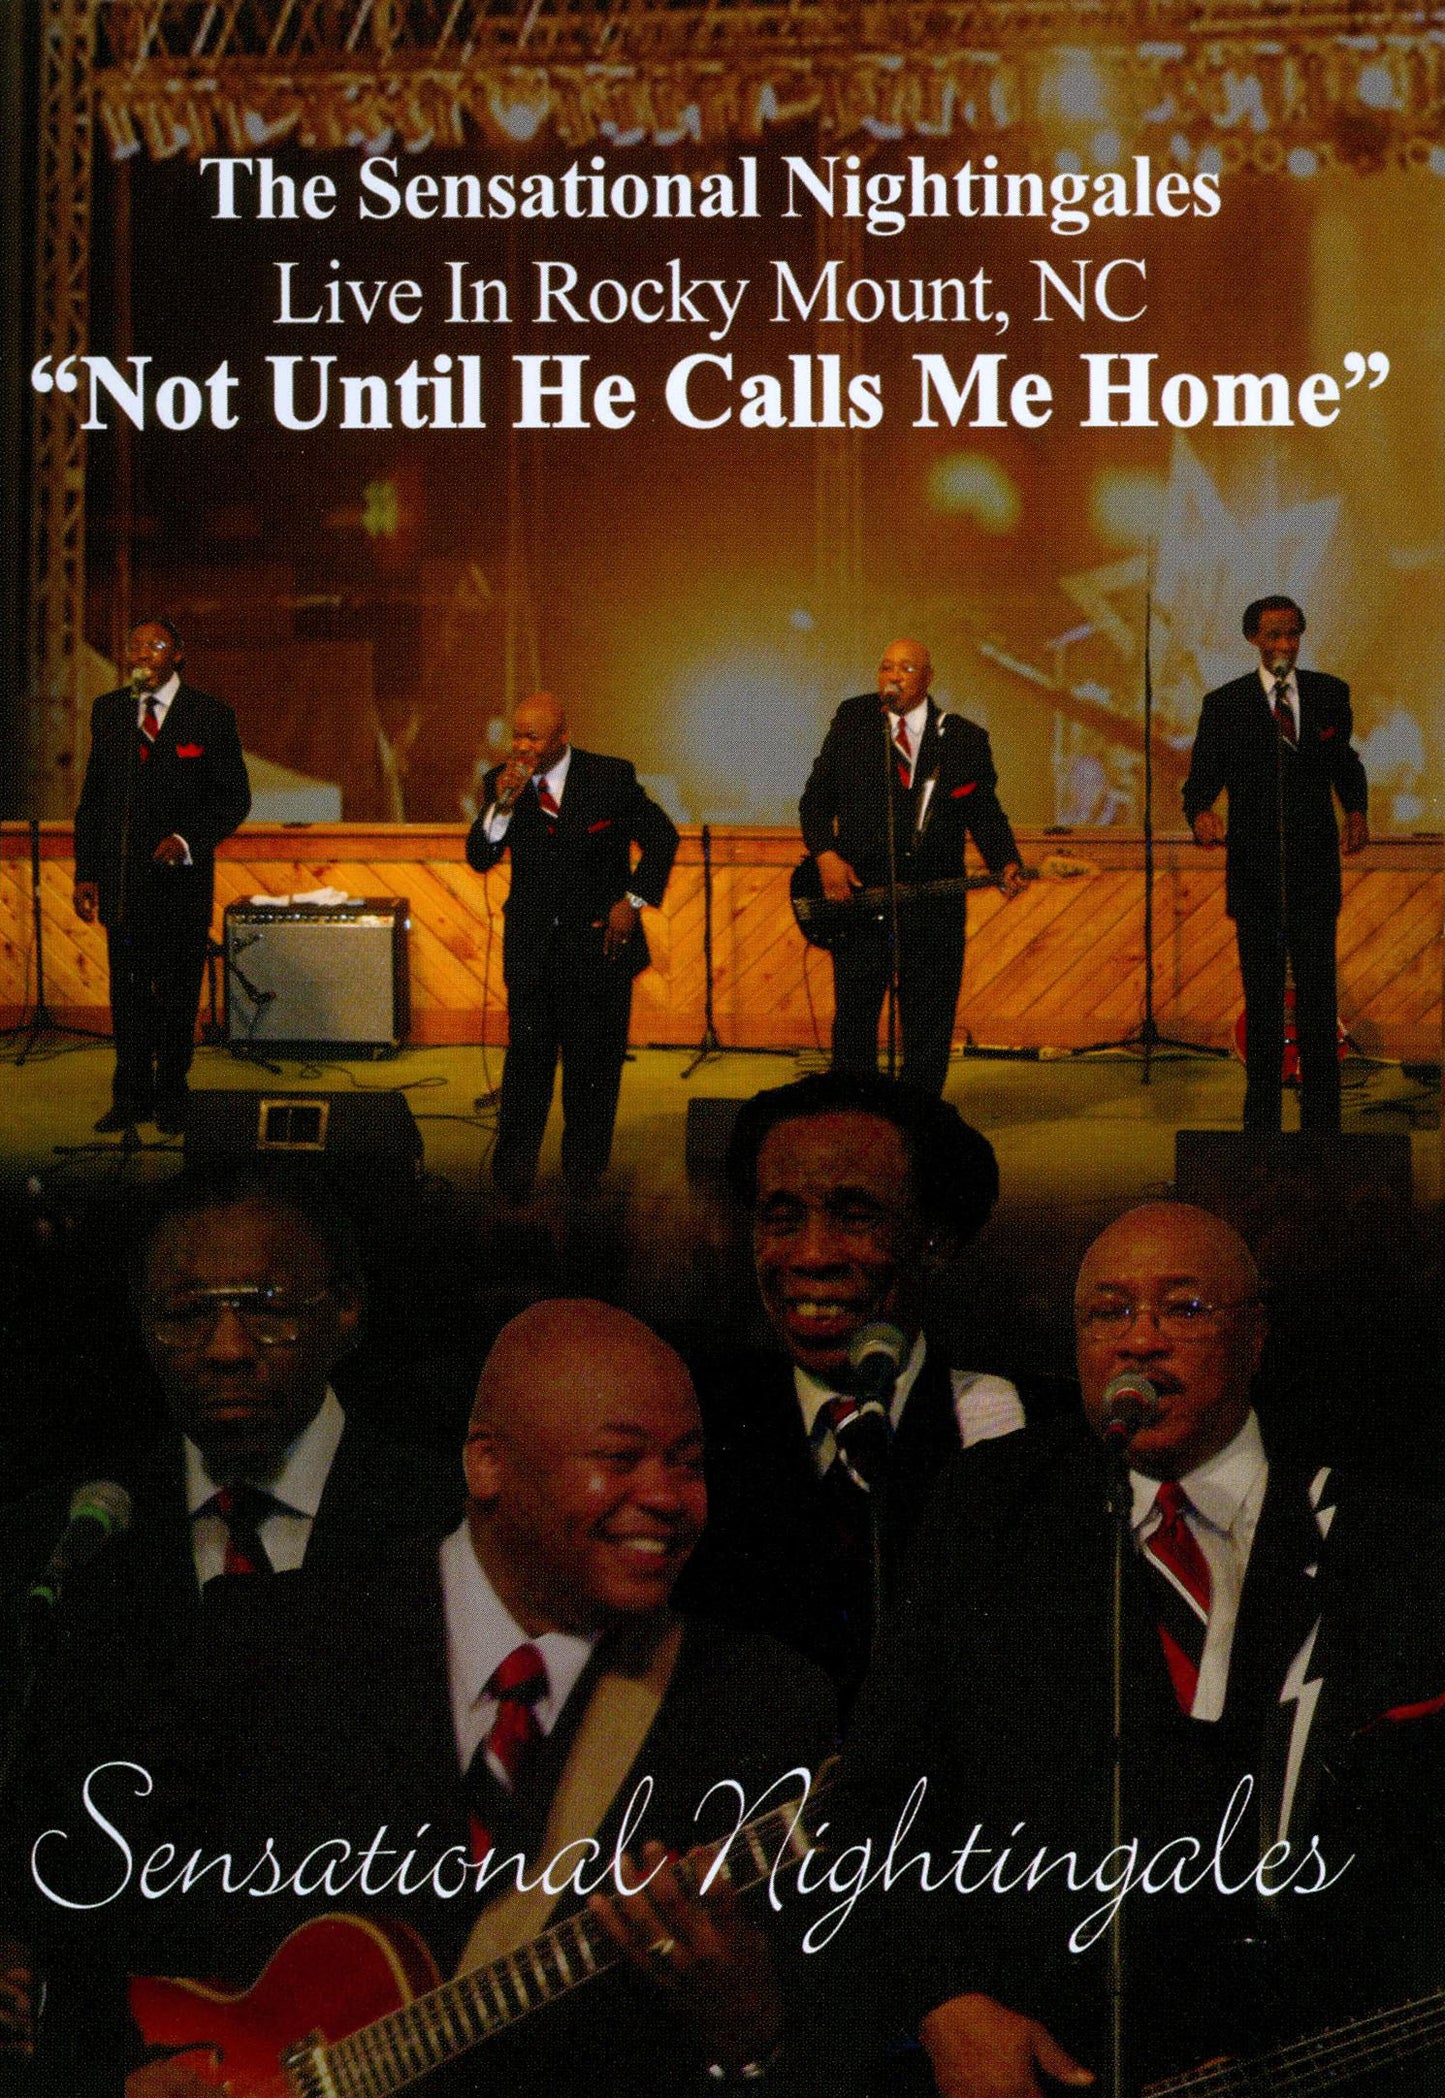 Not Unitl He Calls Me Home - Live In Rocky Mount, NC cover art